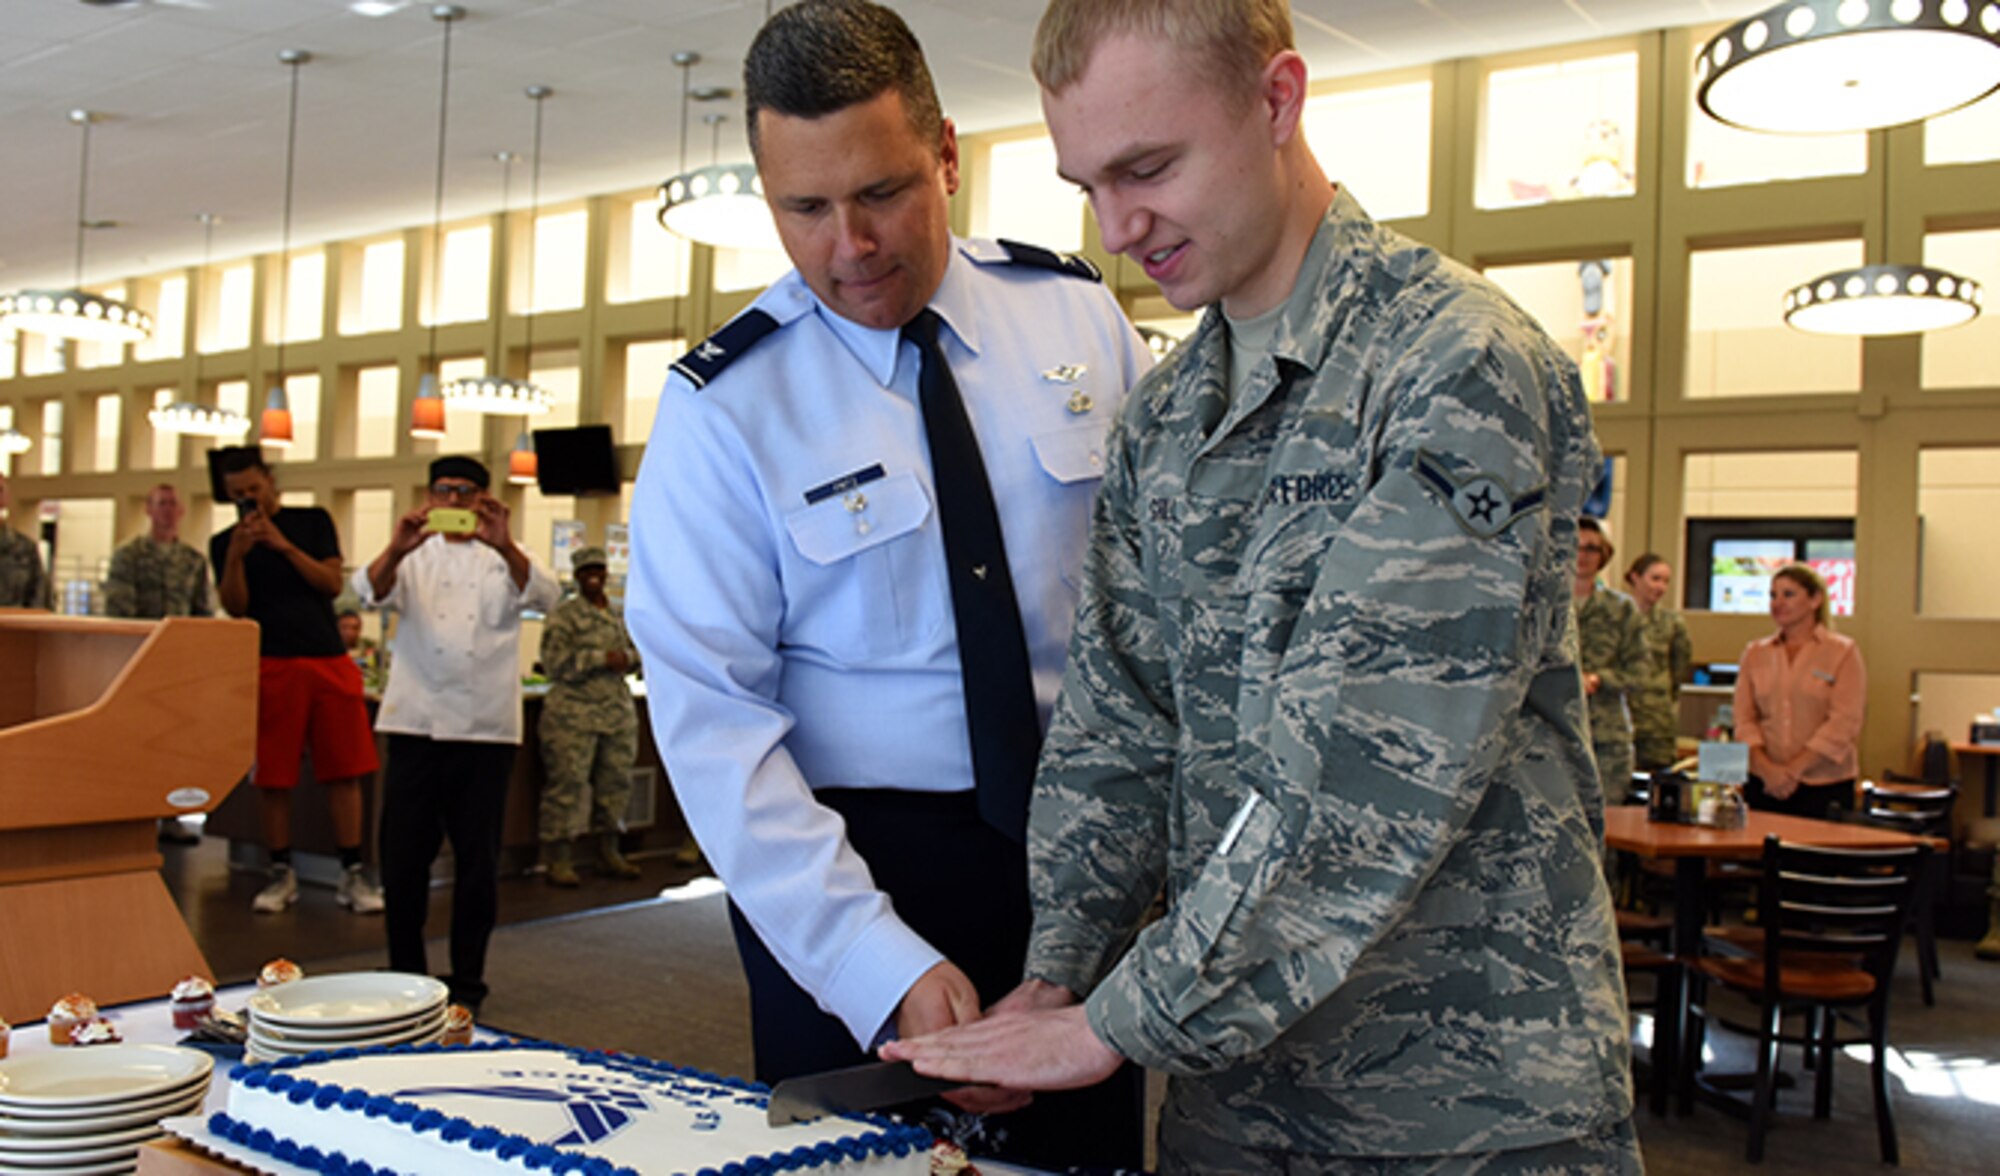 Col. Matthew Fritz, 92nd Air Refueling Wing vice commander and Airman Caleb Grill, 92nd Force Support Squadron services apprentice, cuts the United States Air Force birthday cake during a ceremony Sept. 13, 2016, at Fairchild Air Force Base. Grill was the youngest one present and was accorded the traditional honor of cutting the cake. (U.S. Air Force photo/Airman 1st Class Ryan Lackey)